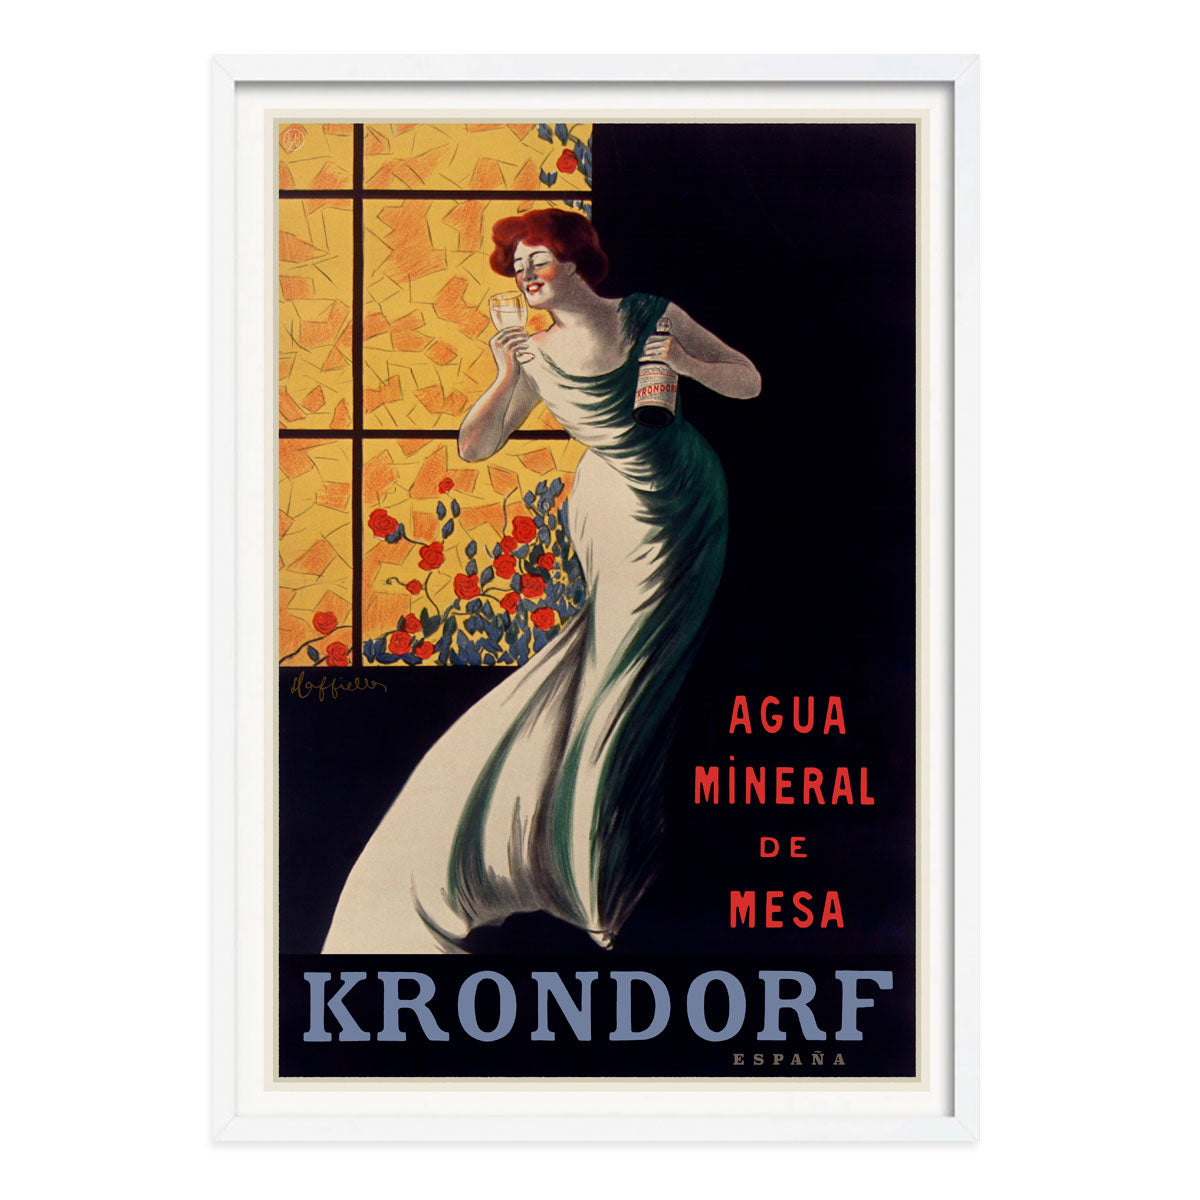 Krondorf retro vintage advertising poster print in white frame from Places We Luv